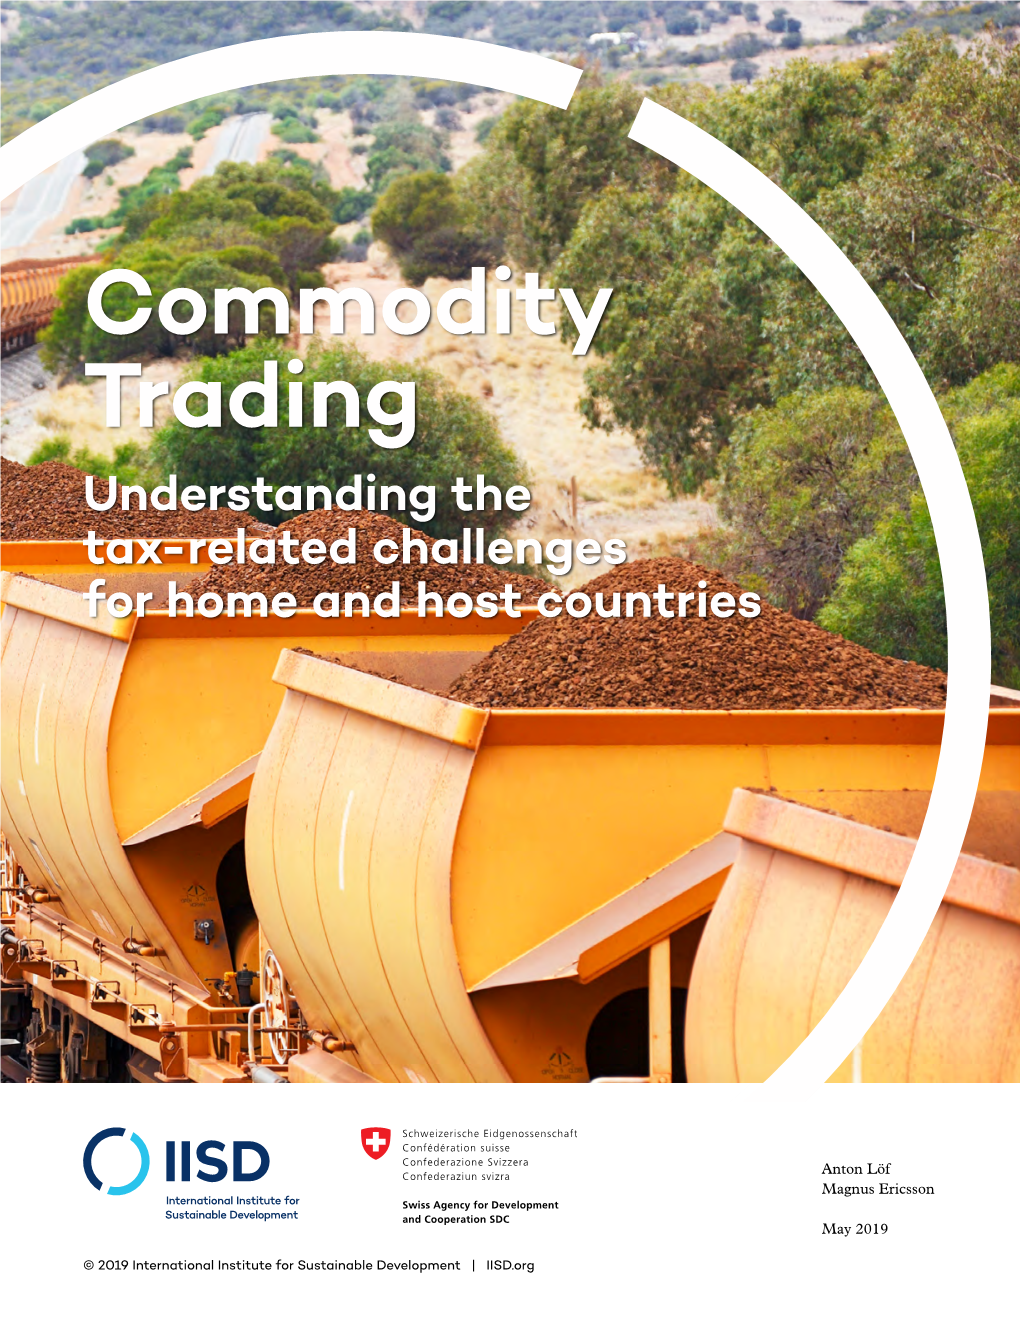 Commodity Trading: Understanding the Tax-Related Challenges for Home and Host Countries